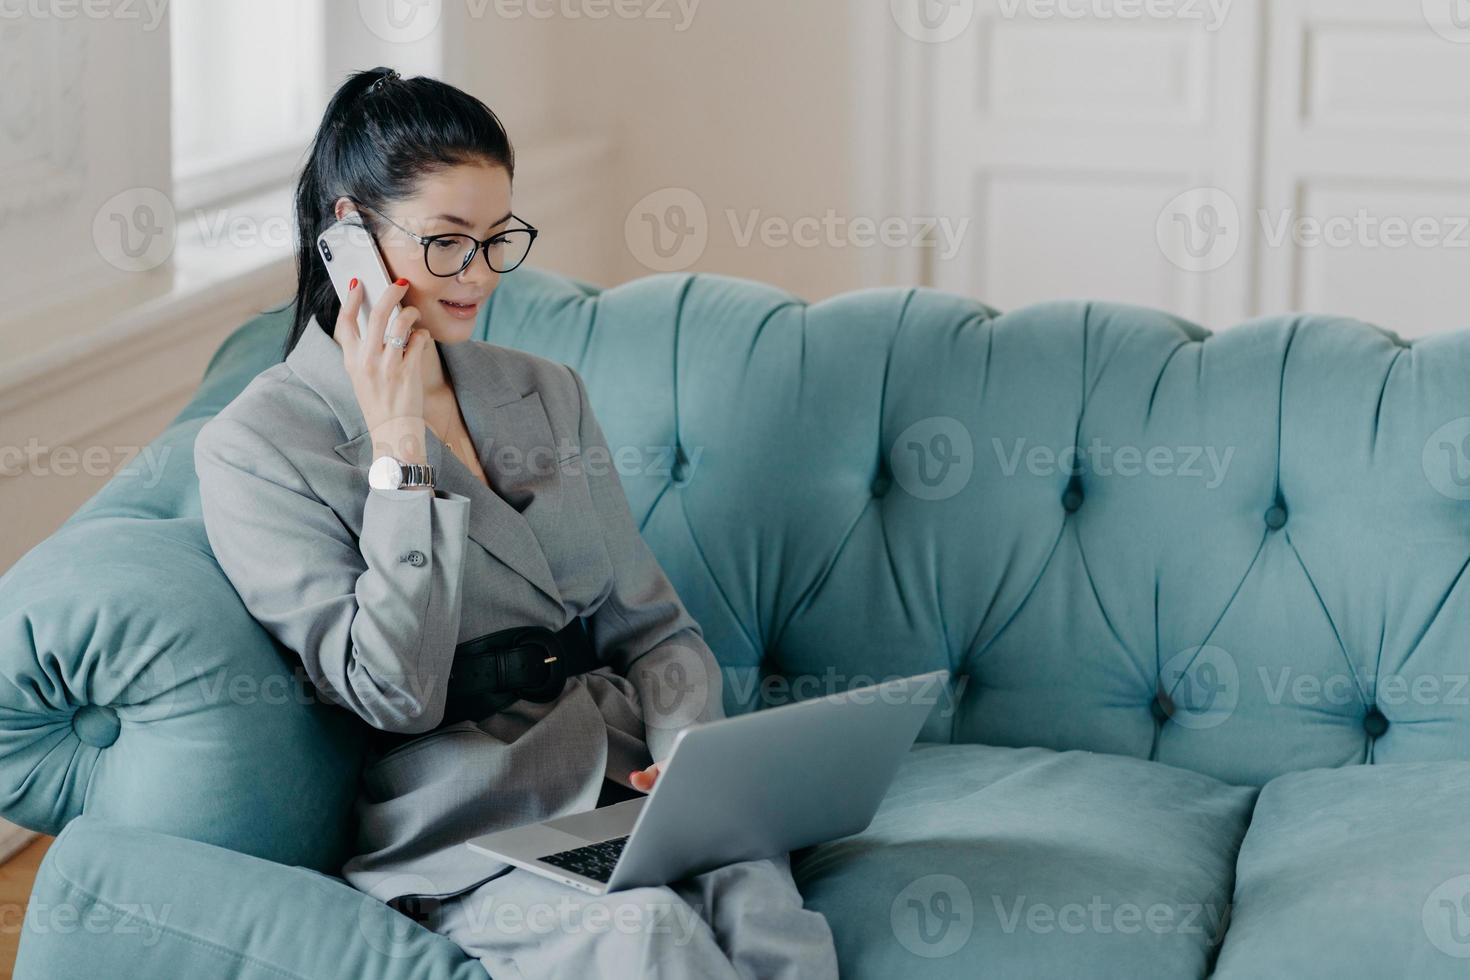 Busy female designer has cell phone conversation, sits in front of opened laptop computer on comfortable sofa, discusses new project. Businesswoman dressed in formal suit works remotely from home photo